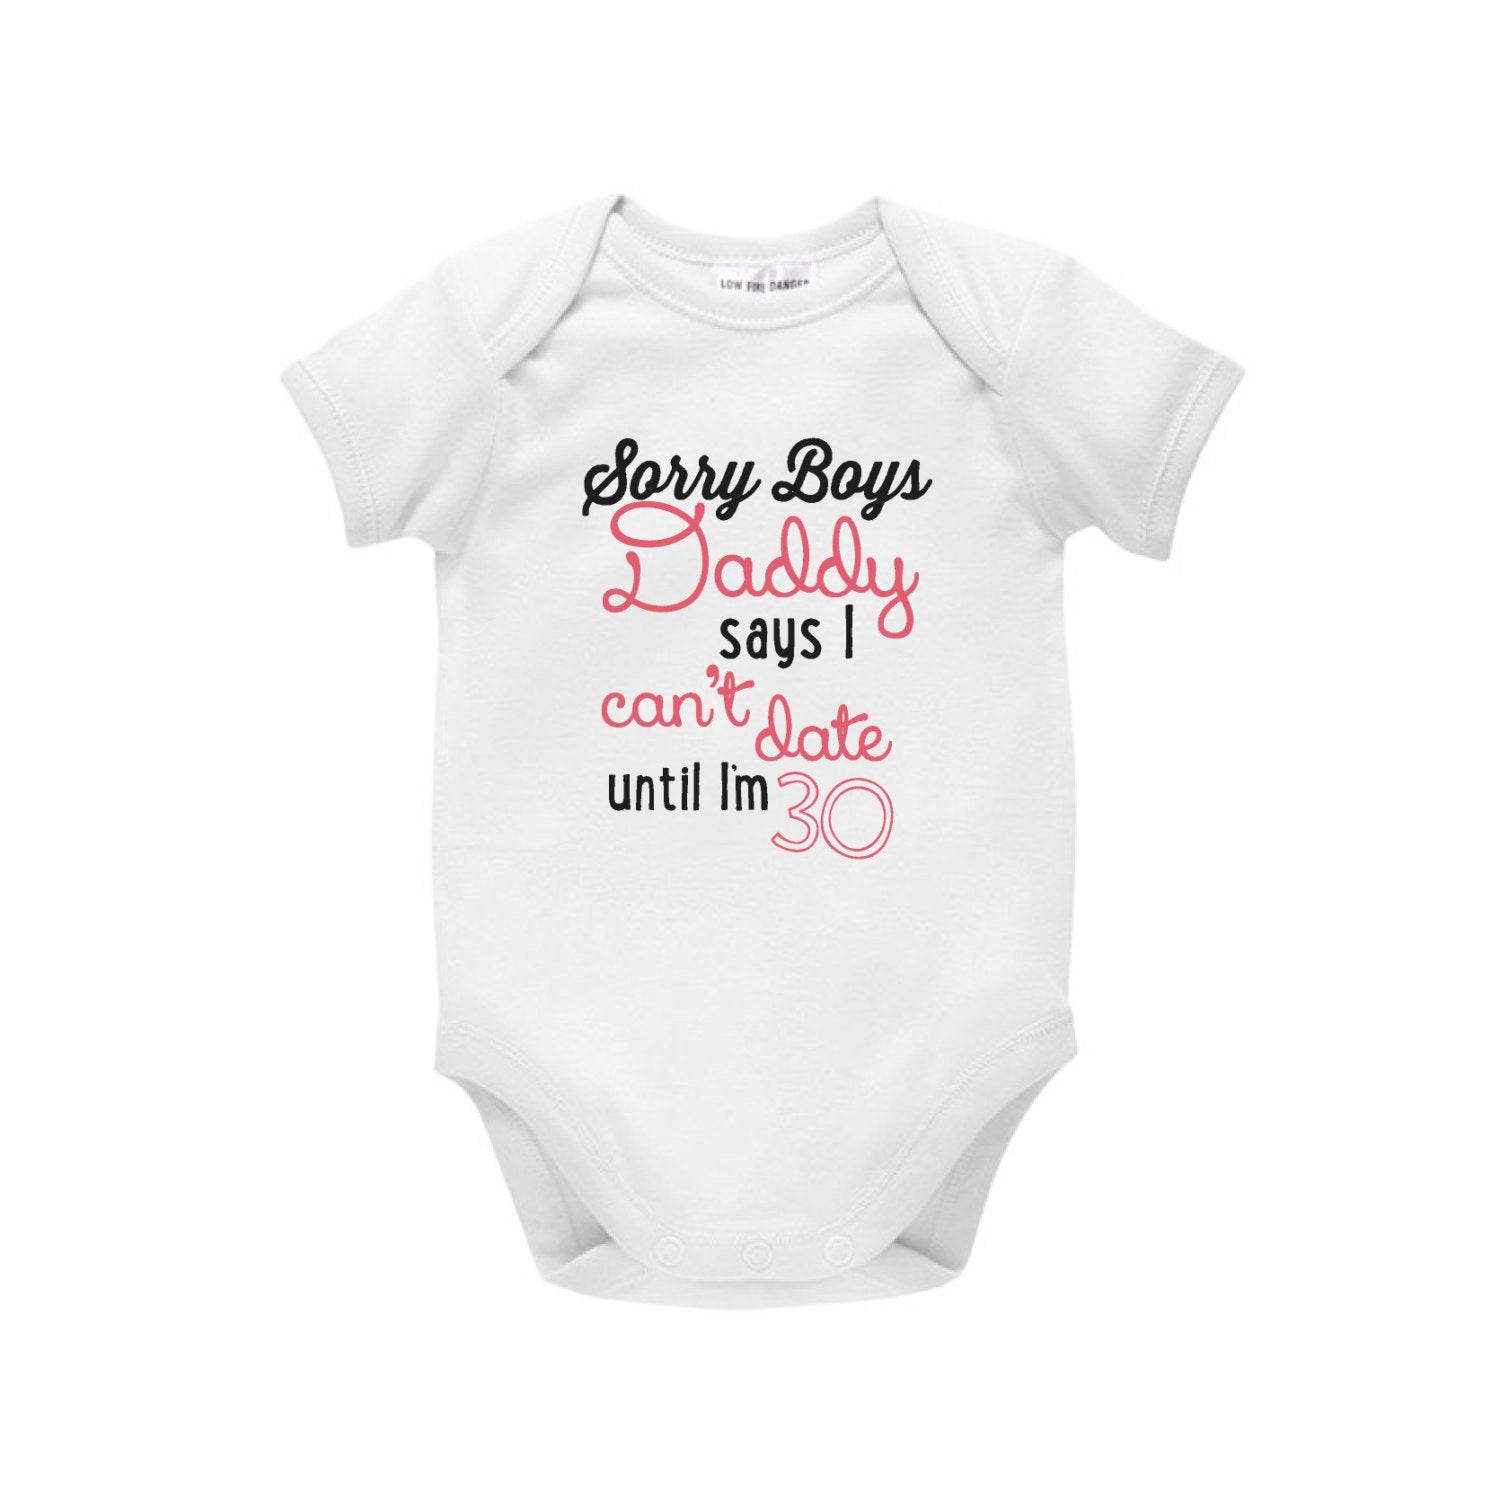 Sorry Boys Daddy Says I Can't Date Until I'm 30, Funny Bodysuit For Baby Girls, Daddy's Little Girl, Daddy's Girl, Baby Shower Gift, U-W-BS